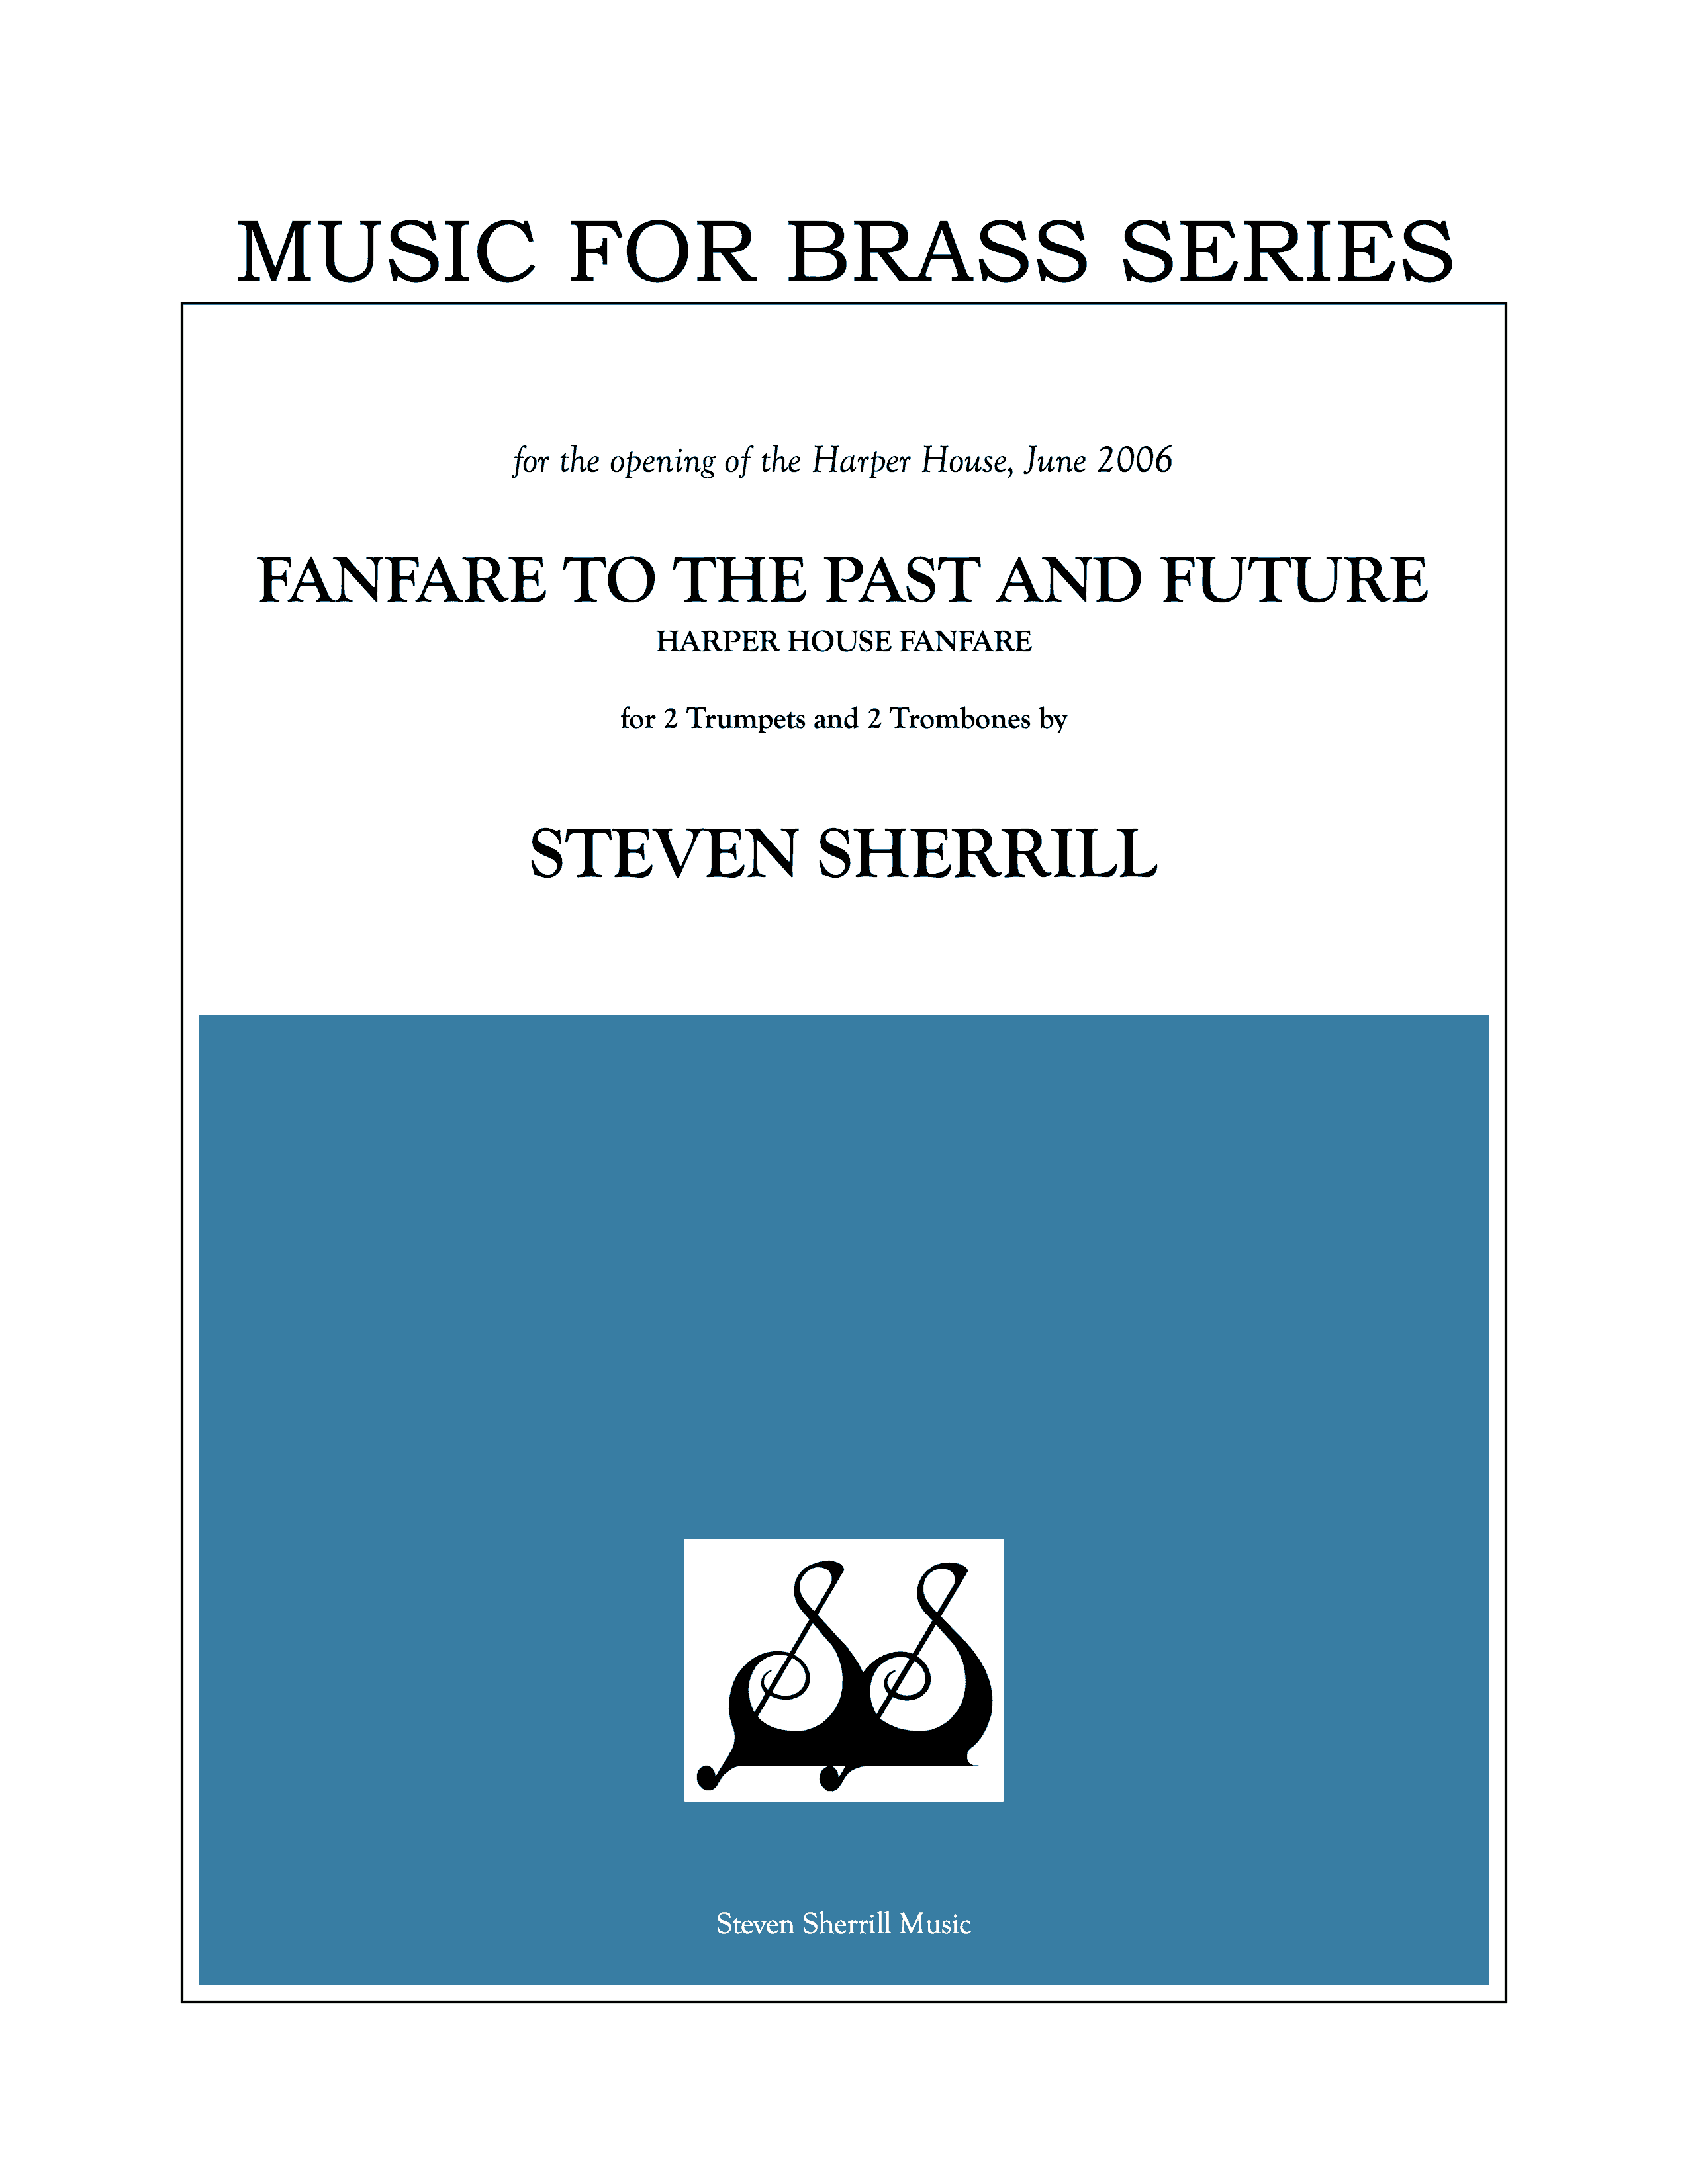 Fanfare to the Past and Future cover page